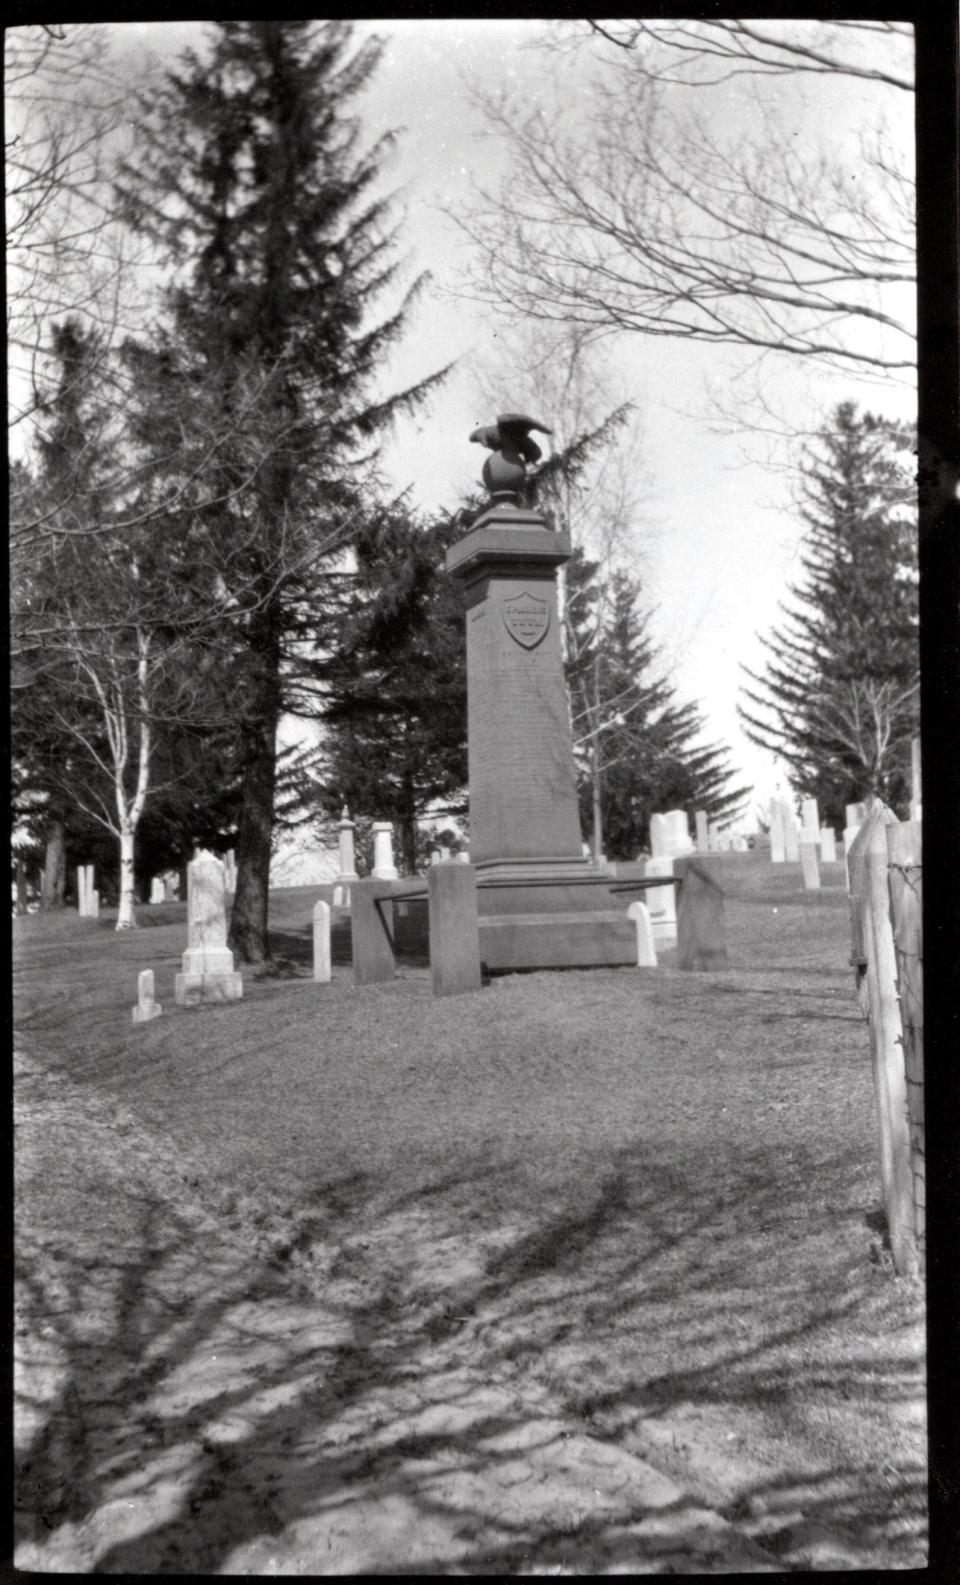 The West Bloomfield Rural Cemetery has the first Civil War monument in Ontario County. It could be seen as part of the West Bloomfield Historical Society's open house last year.